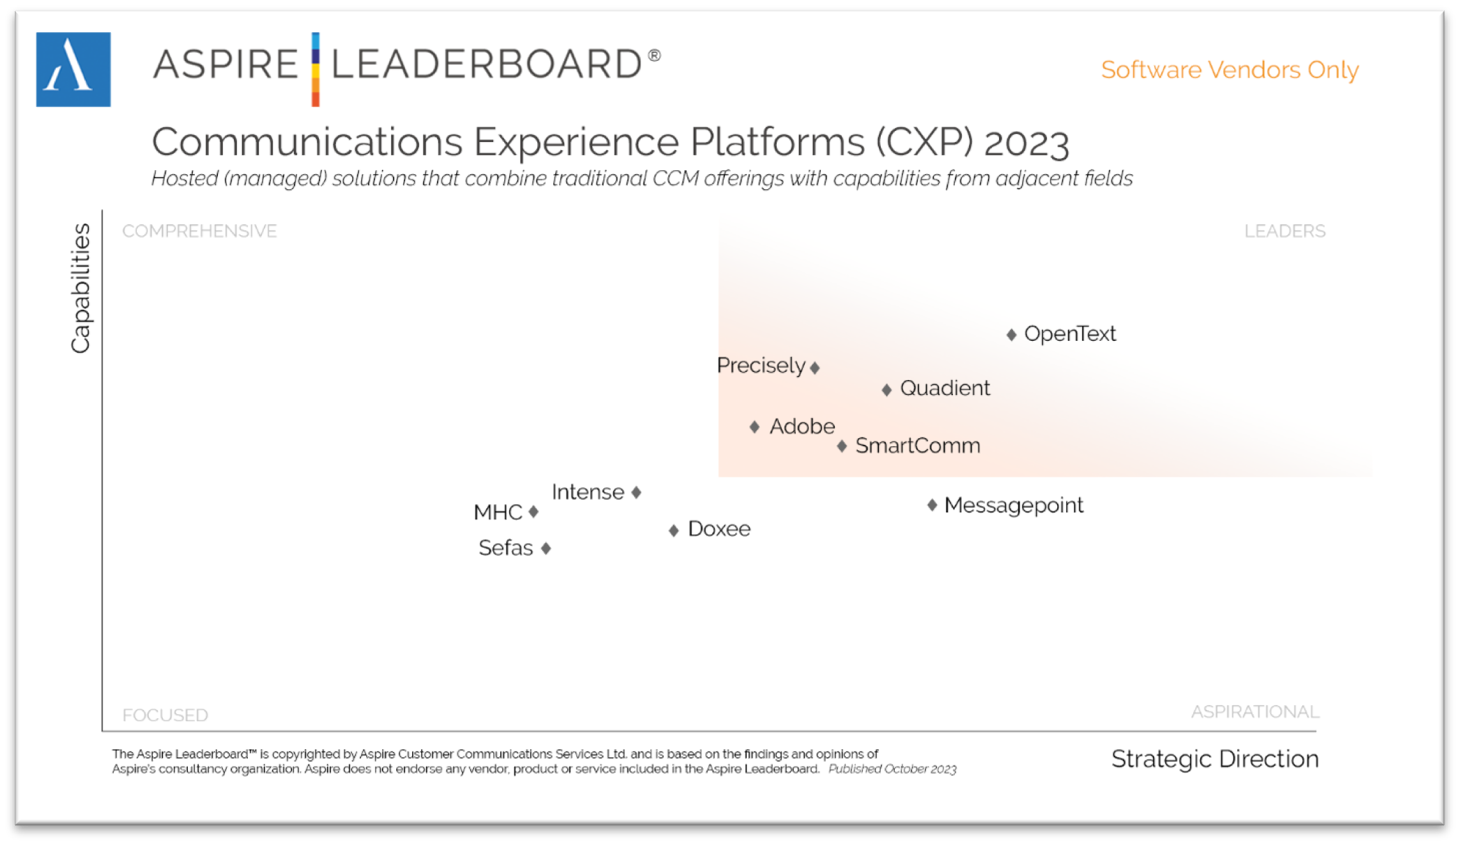 The Aspire Leaderboard for Communications Experience Platforms (CXP) 2023 shows OpenText as a leader in the top right of the graph of capabilities vs. strategic direction, ahead of other vendors including Messagepoint, Quadient, SmartComm, Adobe, Precisely, Doxee, Intense, MHC and Sefas.